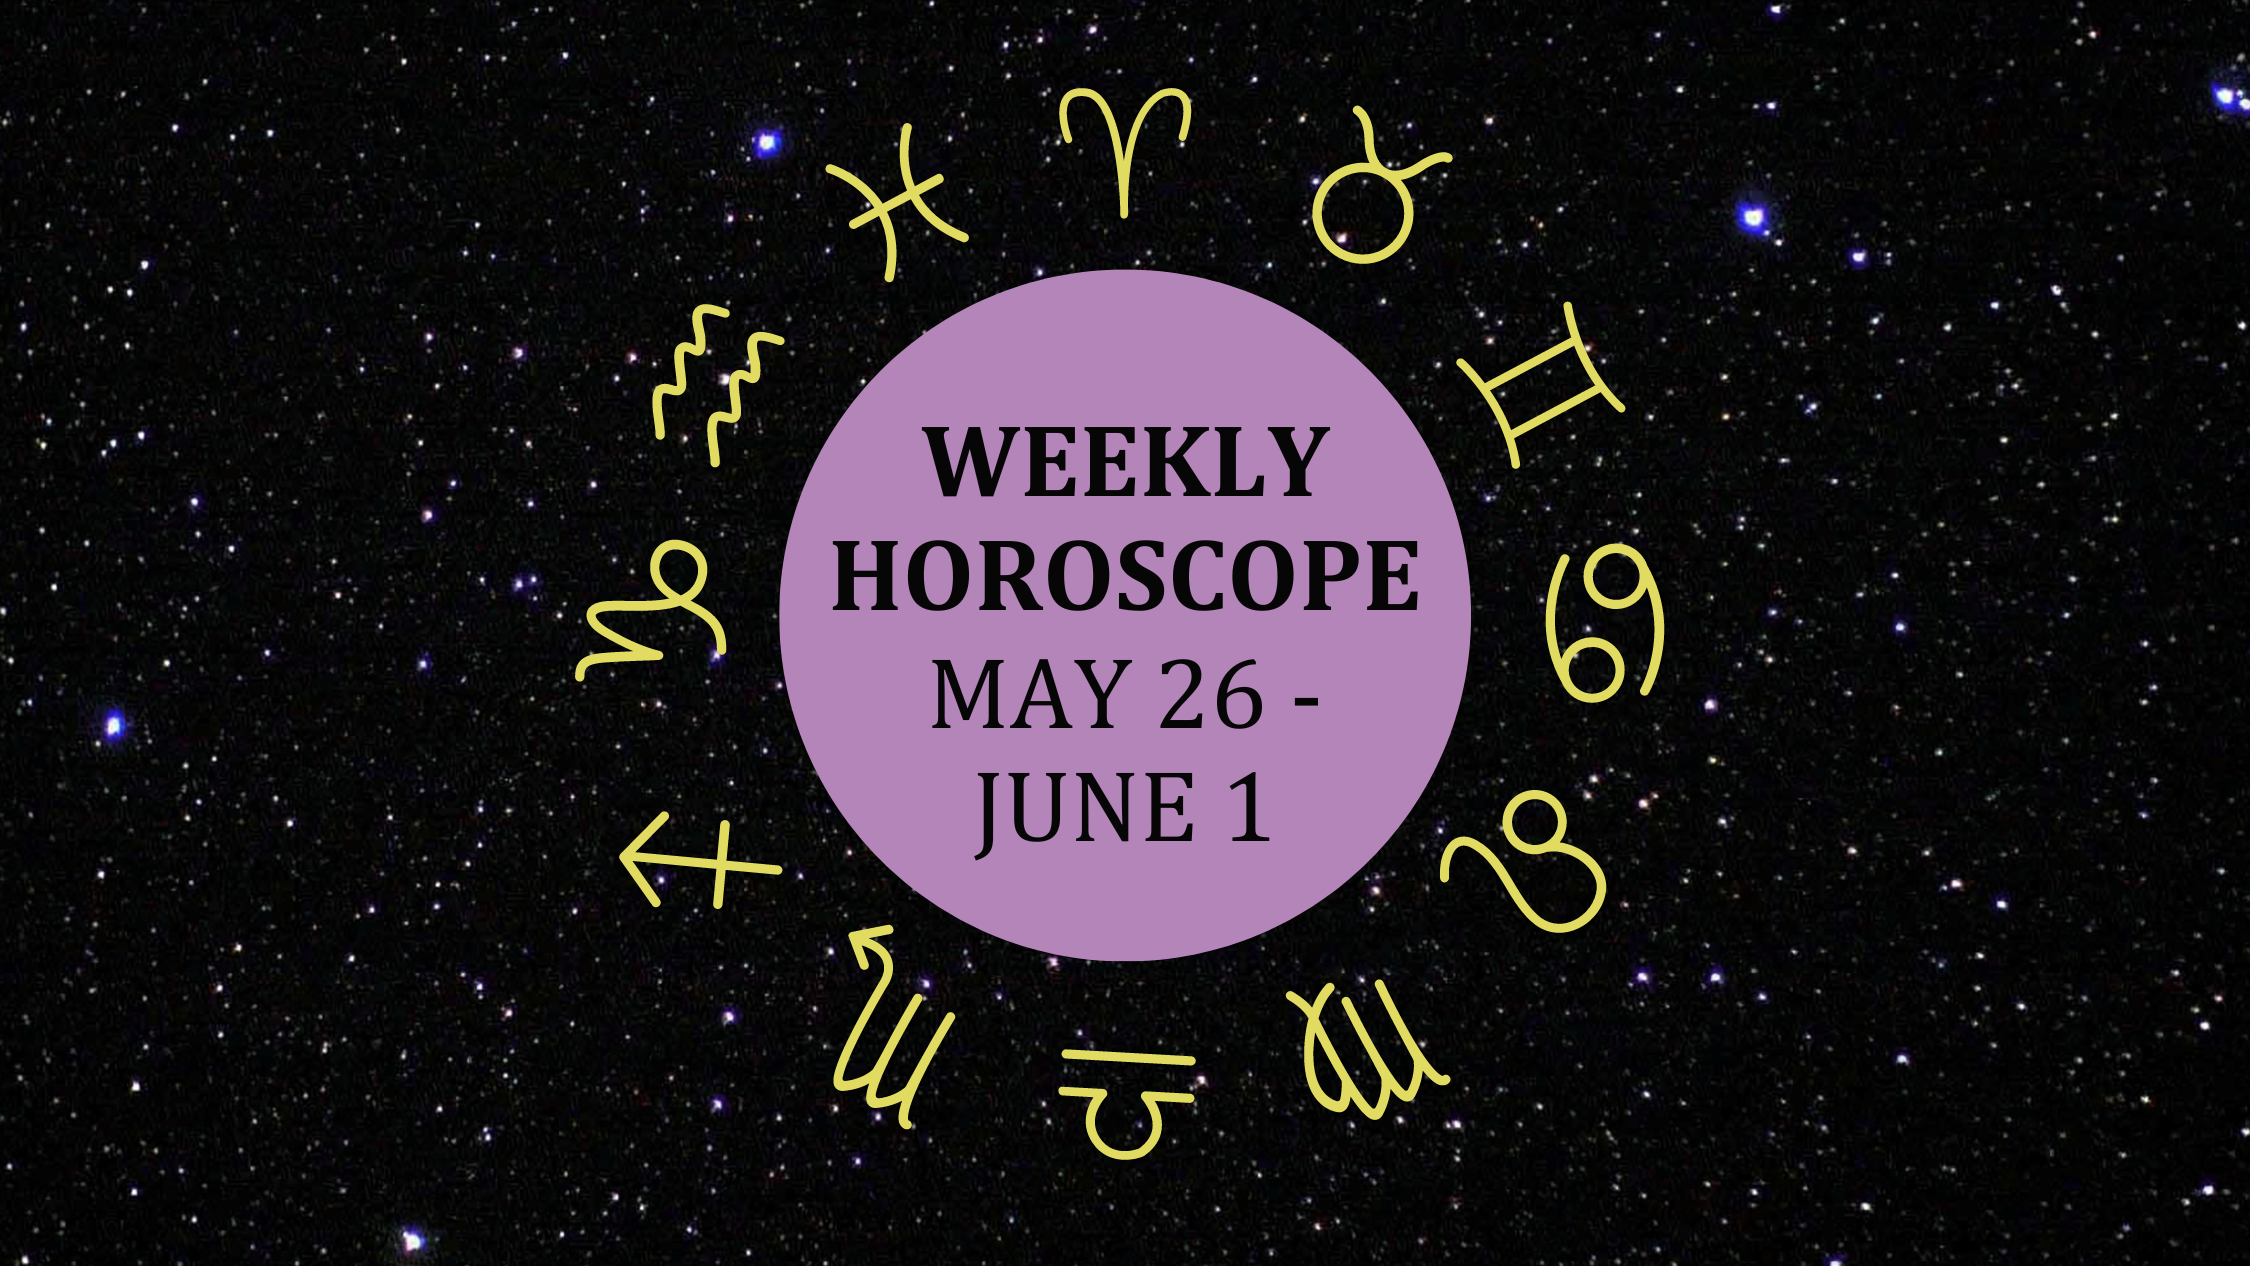 Zodiac wheel with text in the middle: "Weekly Horoscope: May 26-June 1"